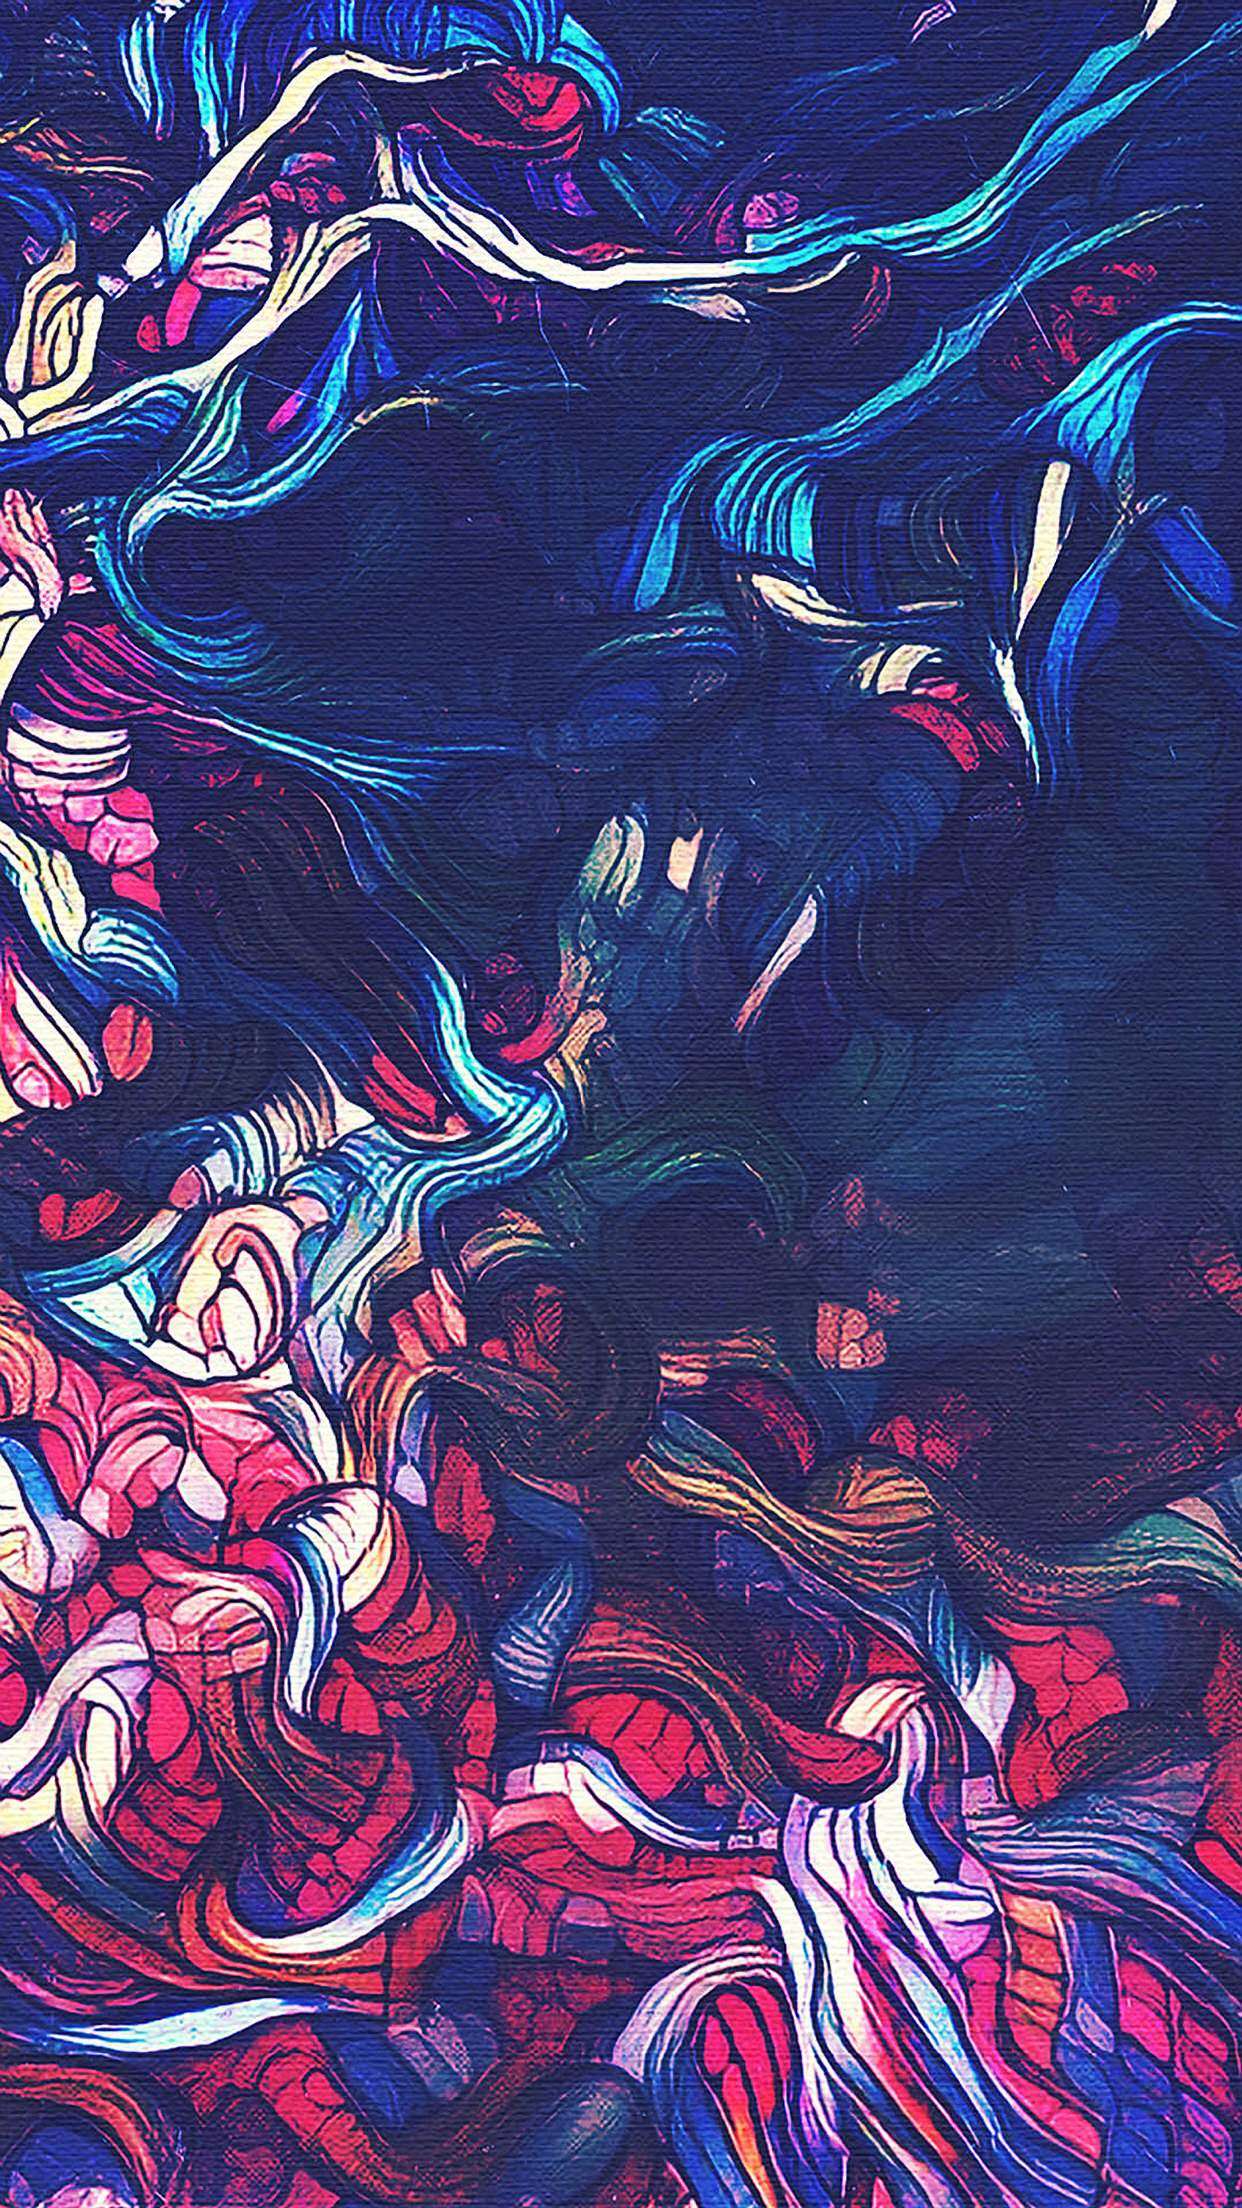 Abstract Art Wallpaper For iPhone X, 8 And 8 Plus (Ep. 7)